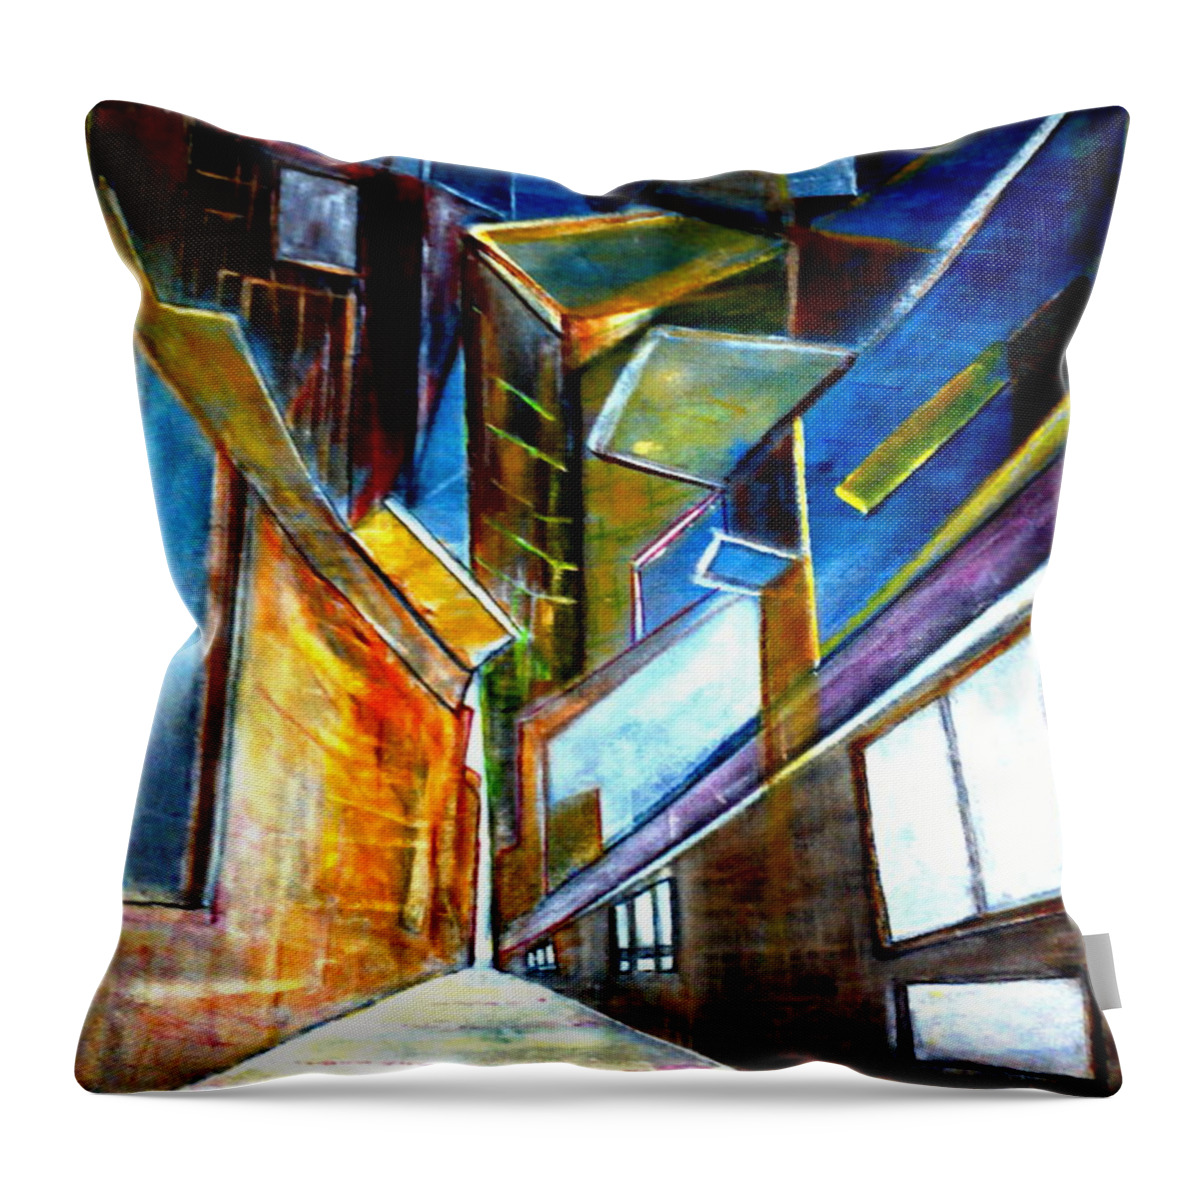 Abstract Throw Pillow featuring the painting Silence by Subrata Bose